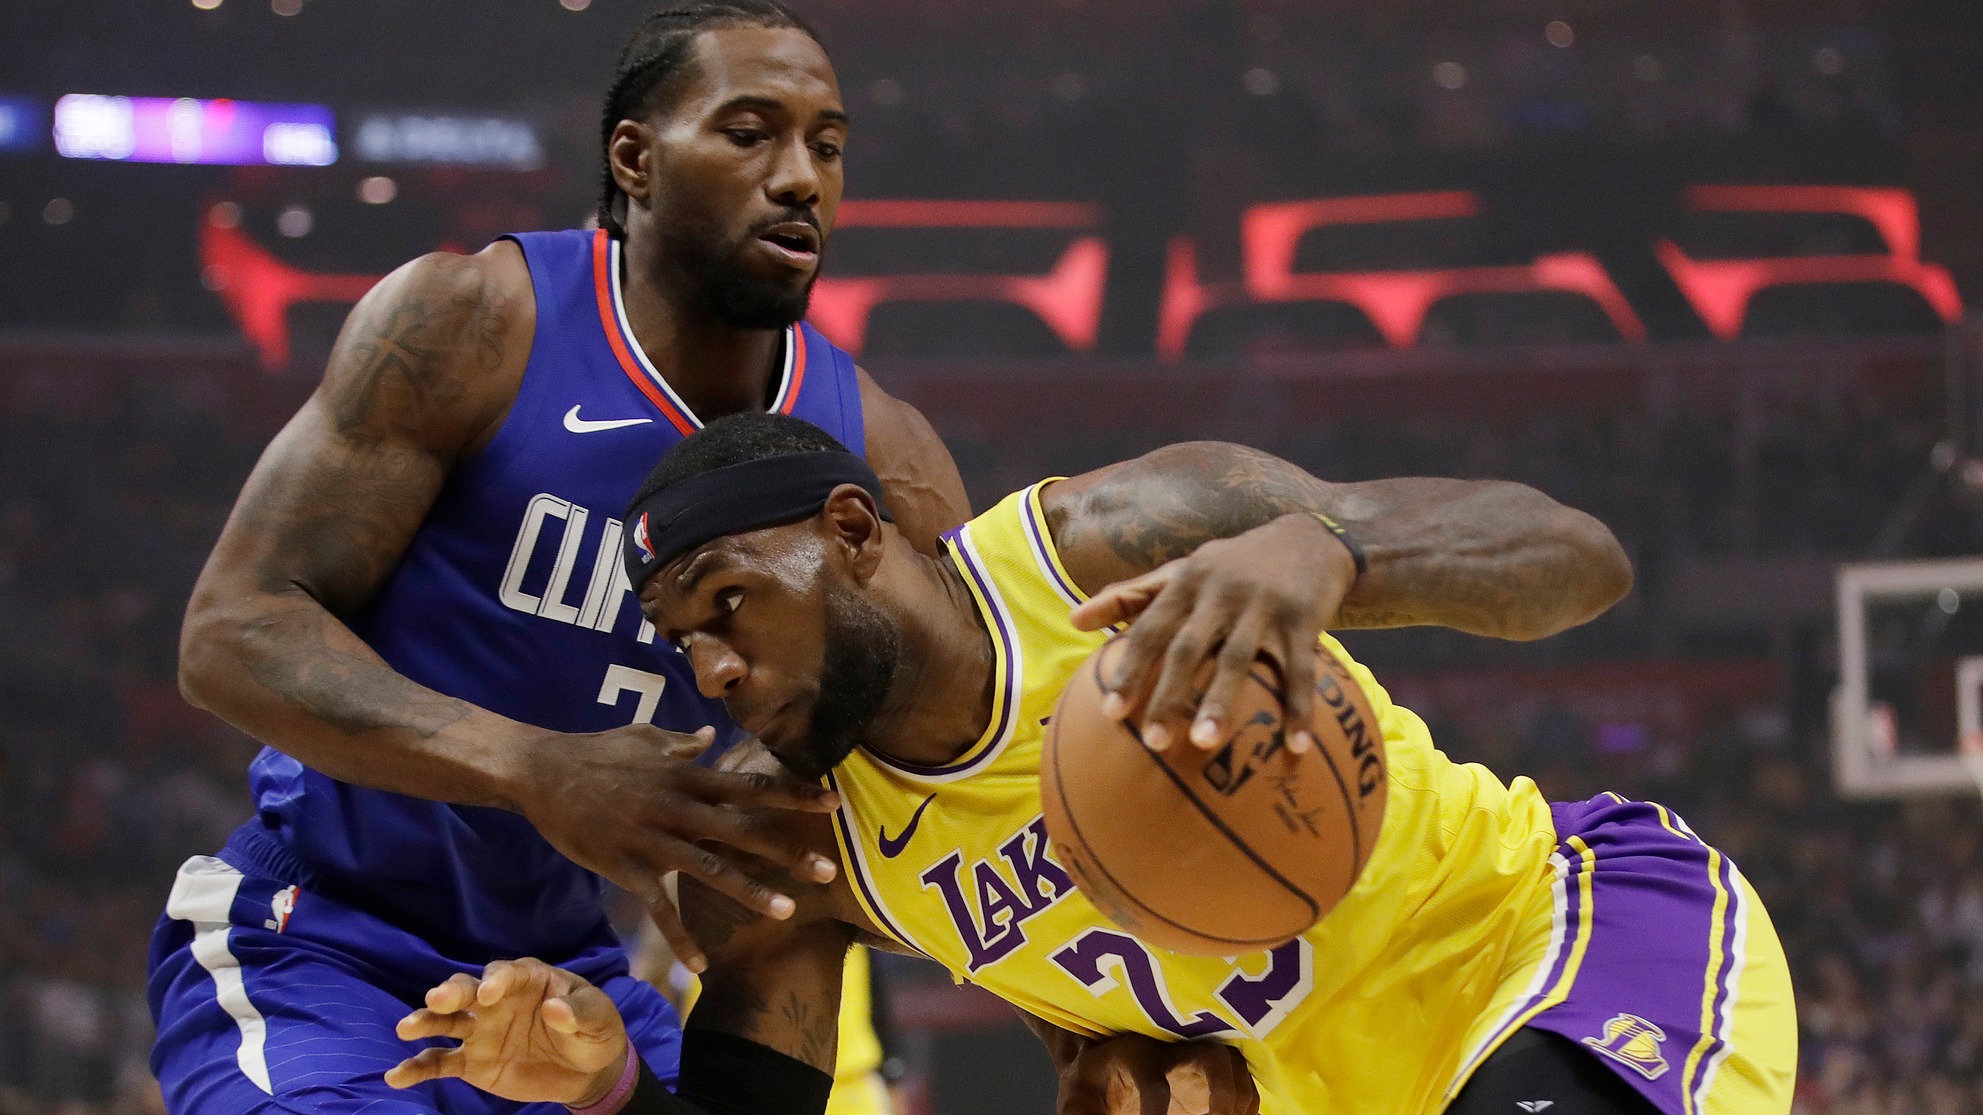 Lakers Vs Clippers : Lakers vs Clippers 2020 Season Betting Preview, Odds, and ... - You are watching clippers vs lakers game in hd directly from the staples center, los angeles, usa, streaming live for your computer, mobile and tablets.